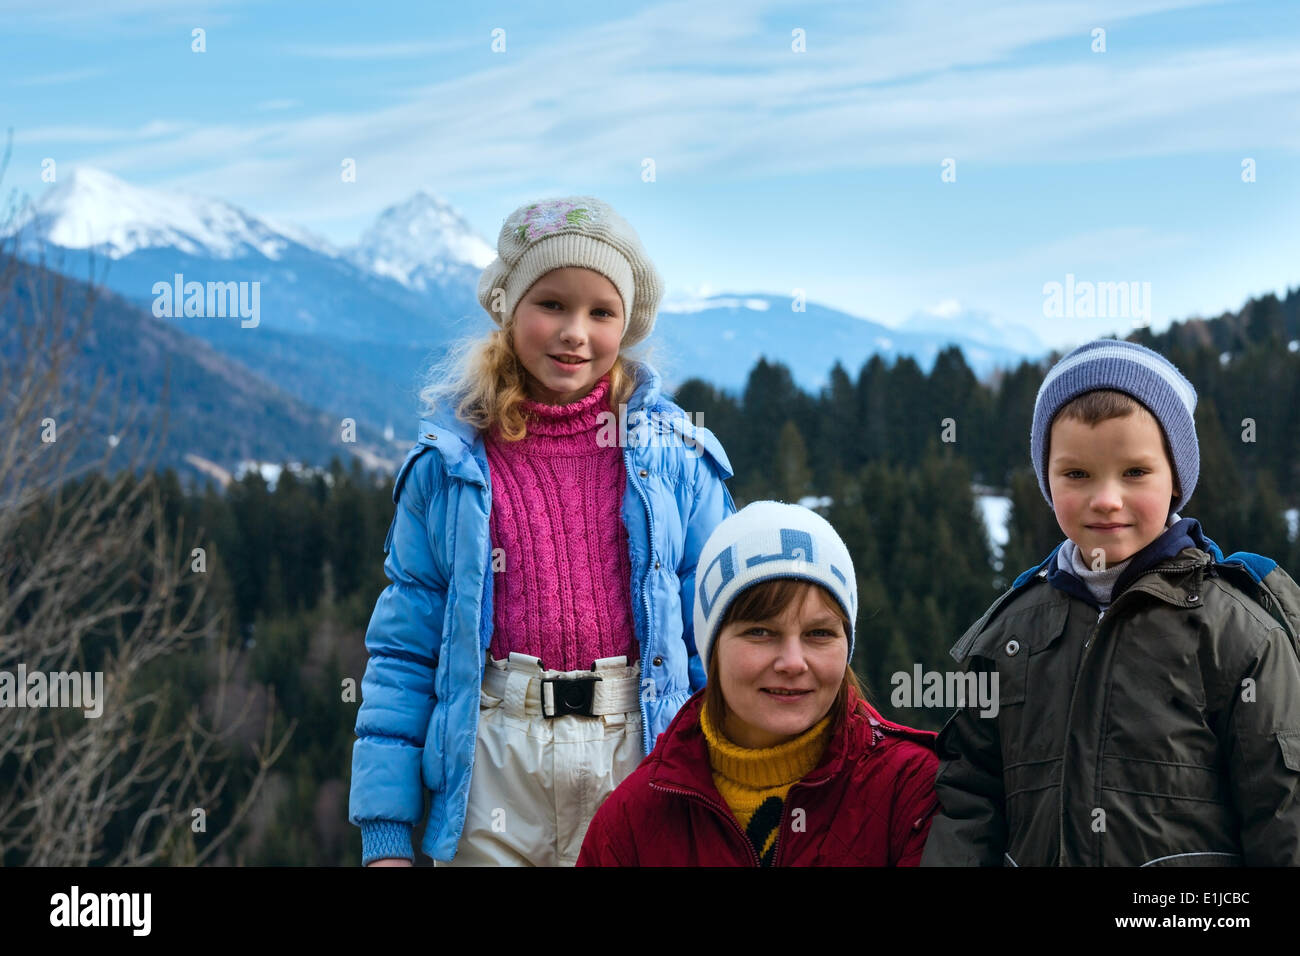 Family and winter mountain landscape Stock Photo